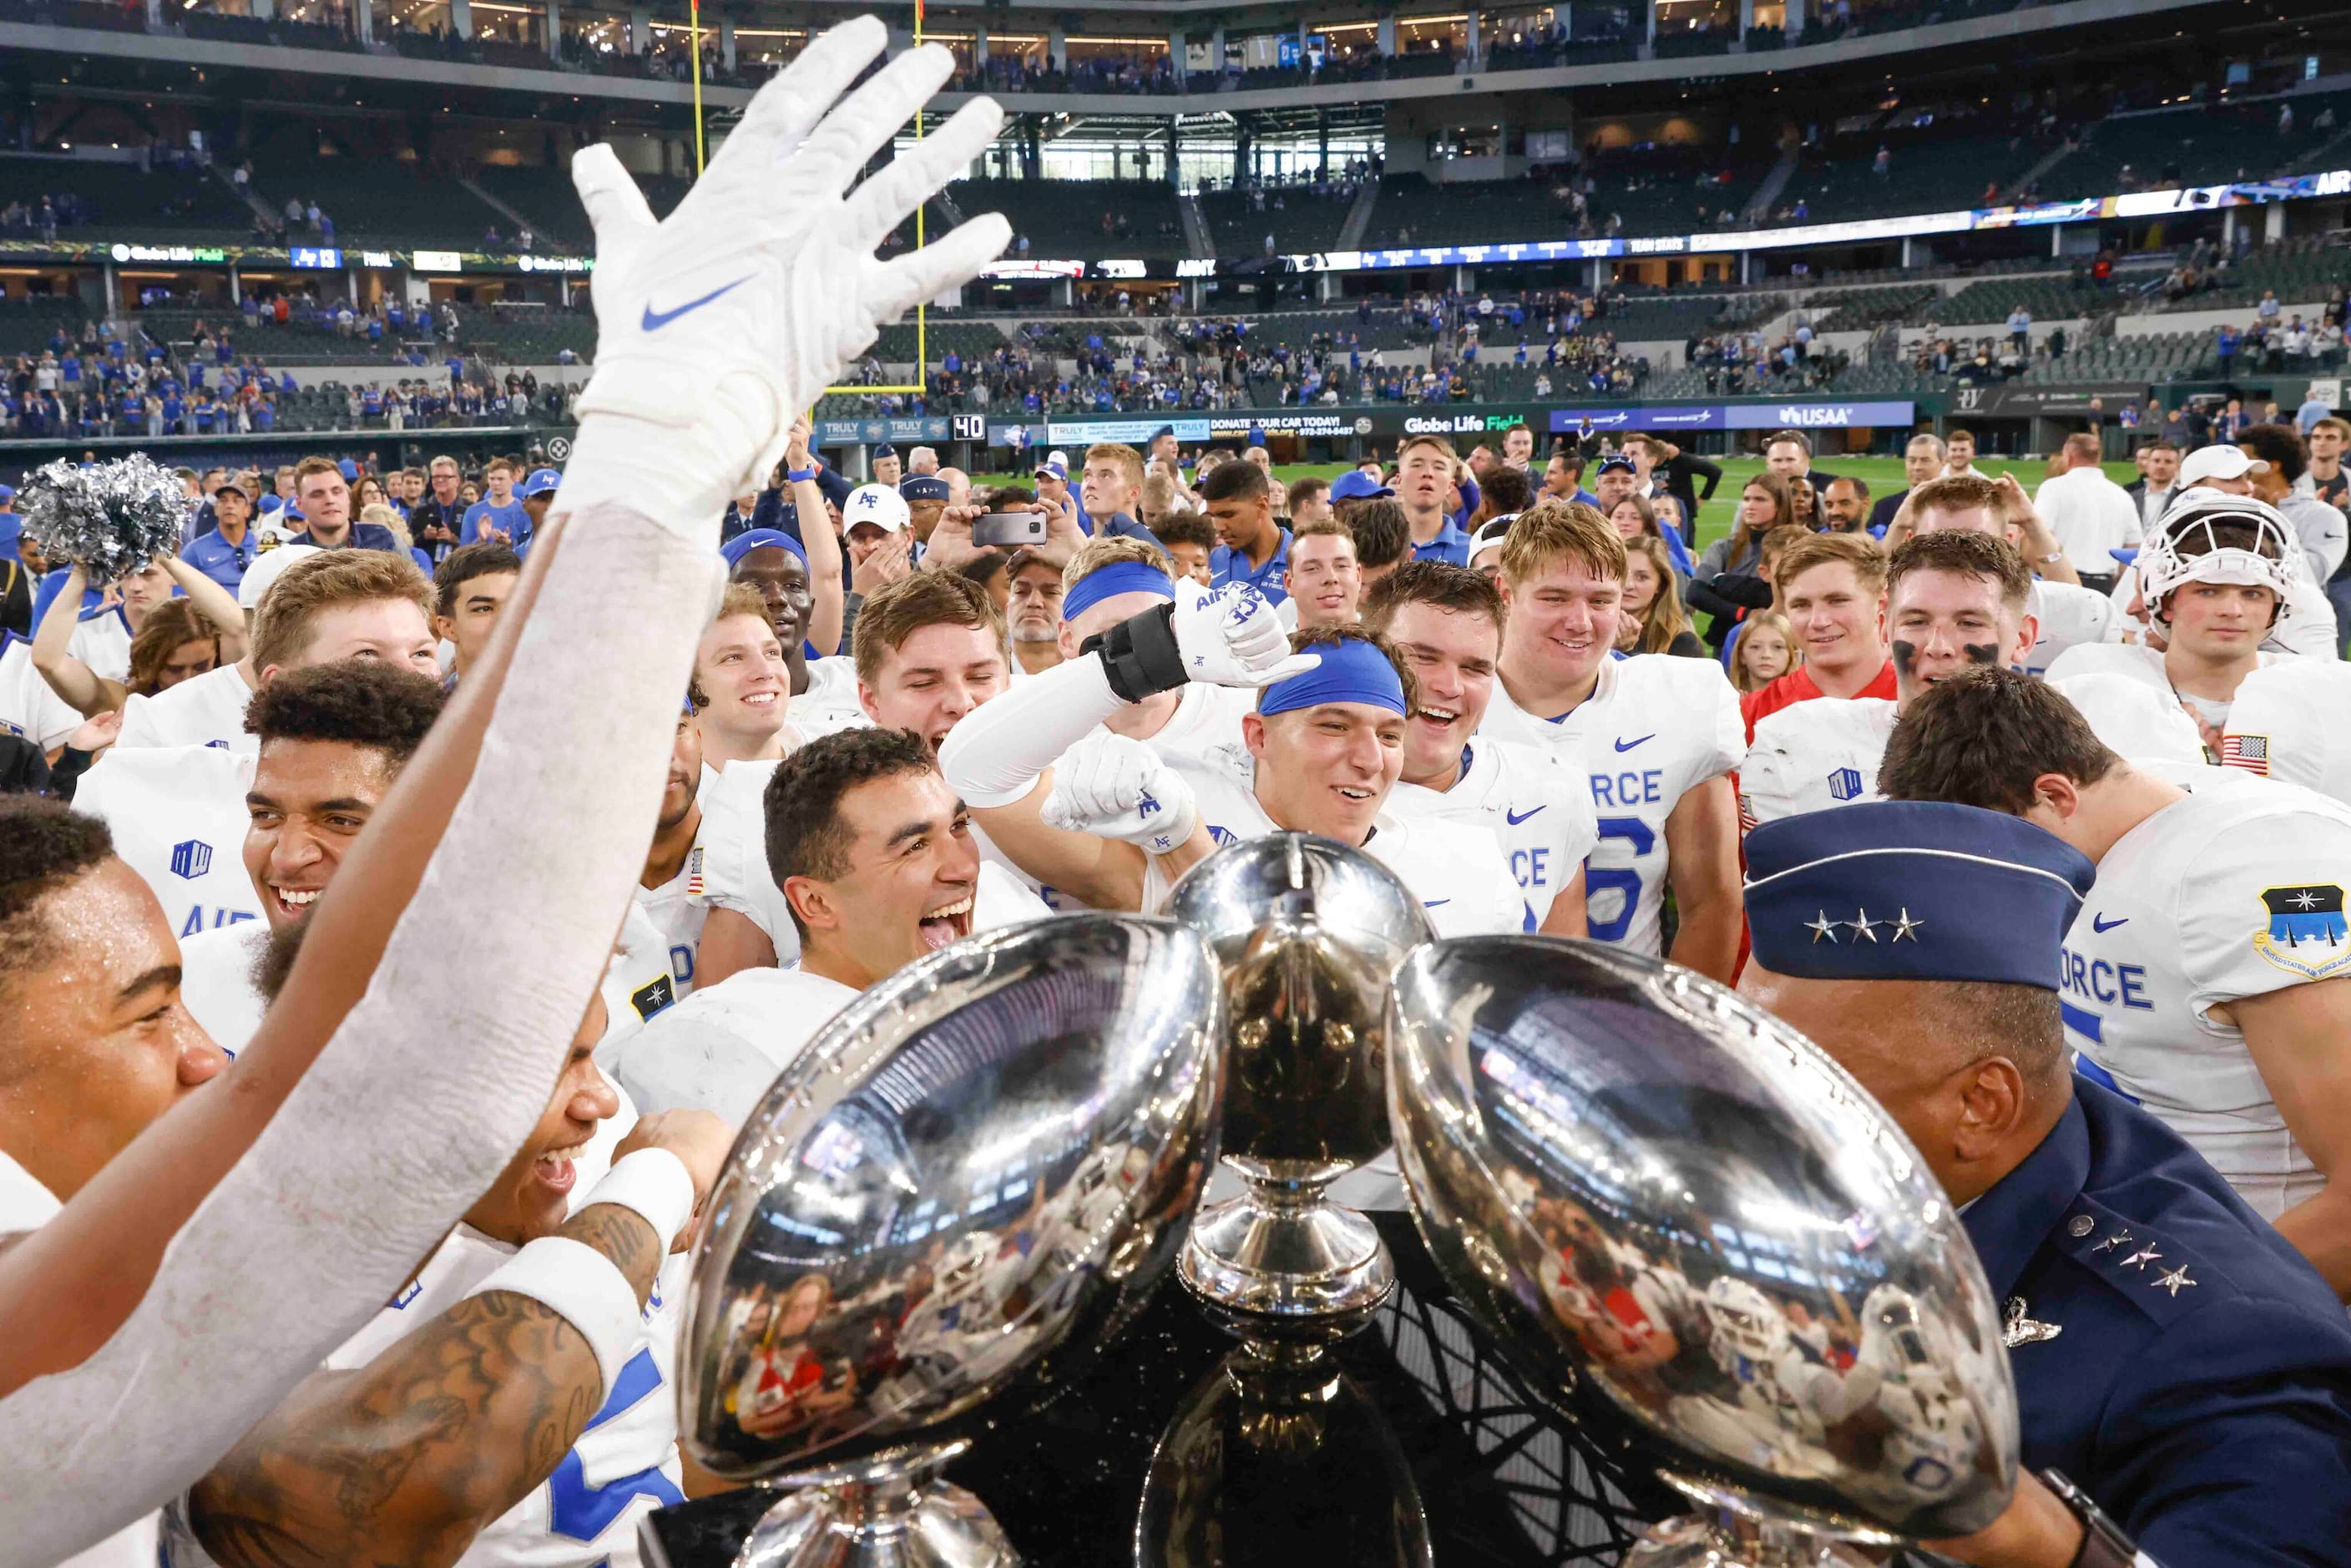 Air Force earns redemption, downs Army to win Commanders' Classic at Globe  Life Field